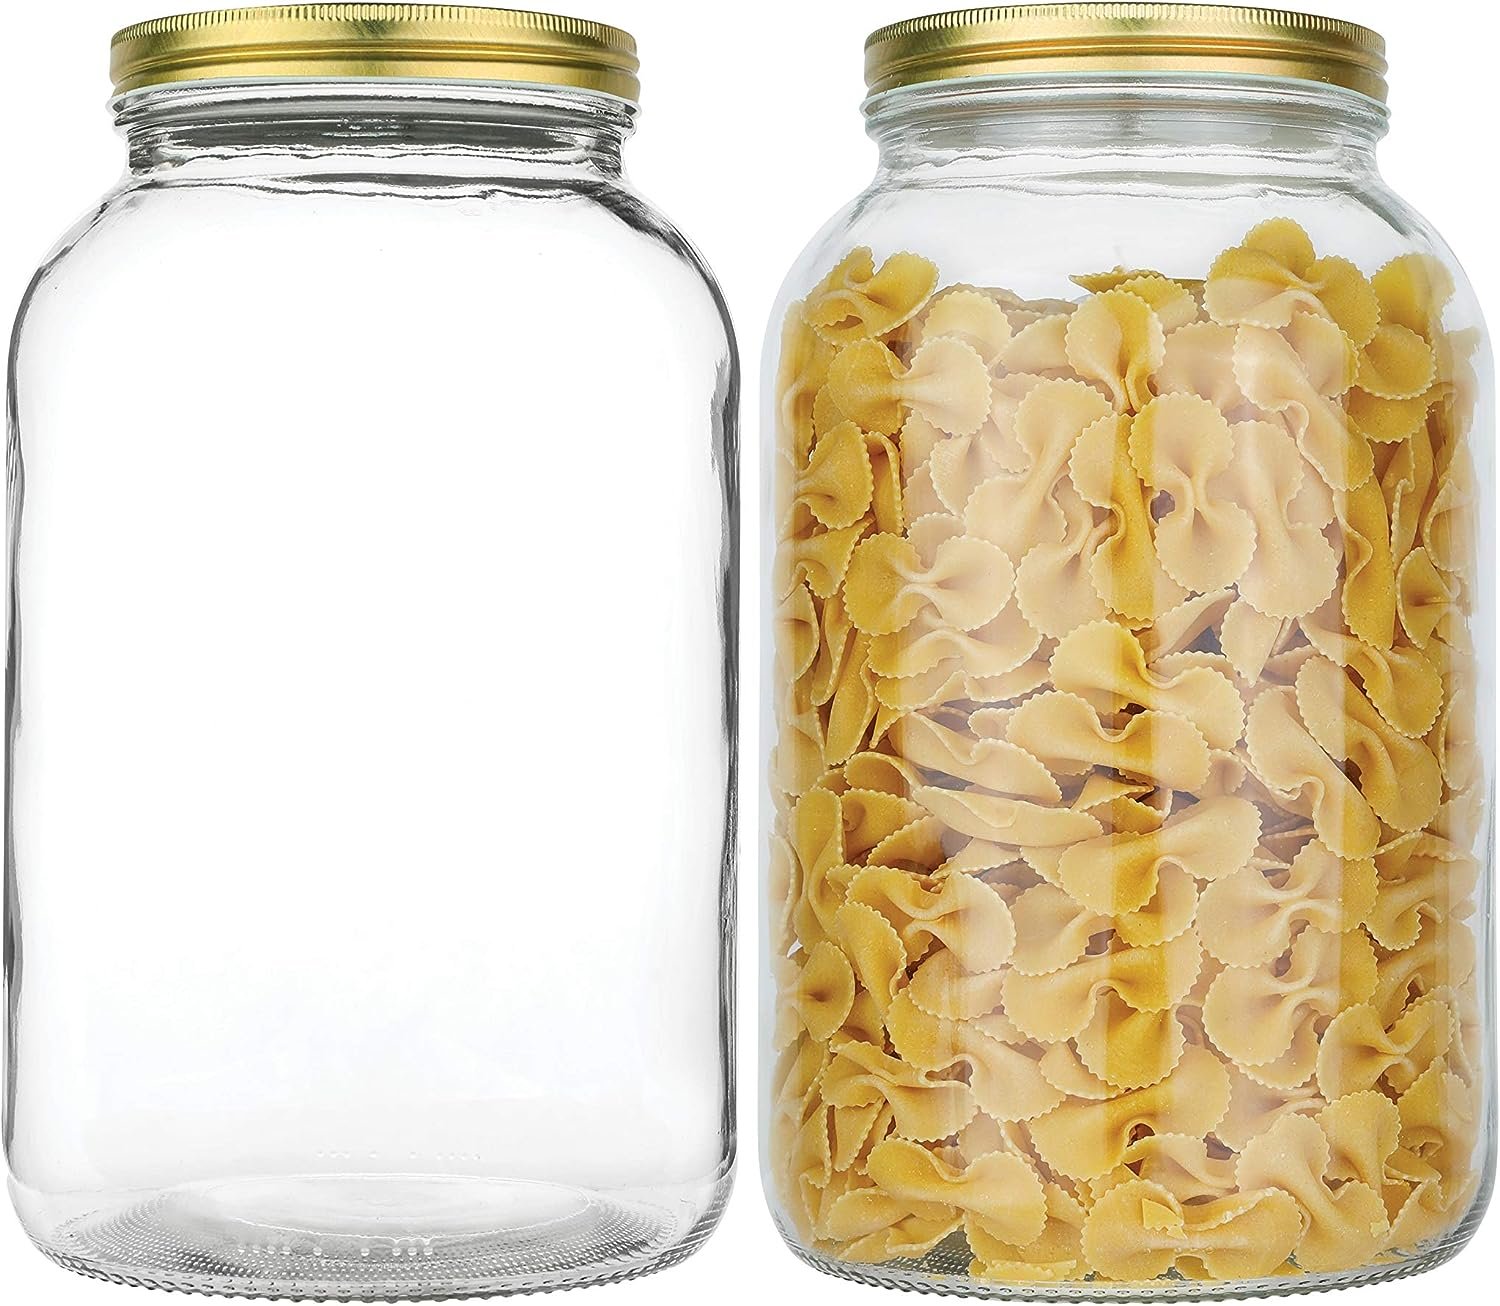 2 Pack - 1 Gallon Glass Mason Jar Wide Mouth with Airtight Metal Lid - Safe for Fermenting Kombucha Kefir - Pickling, Storing and Canning- BPA-Free Dishwasher Safe- Made in USA By Kitchentoolz